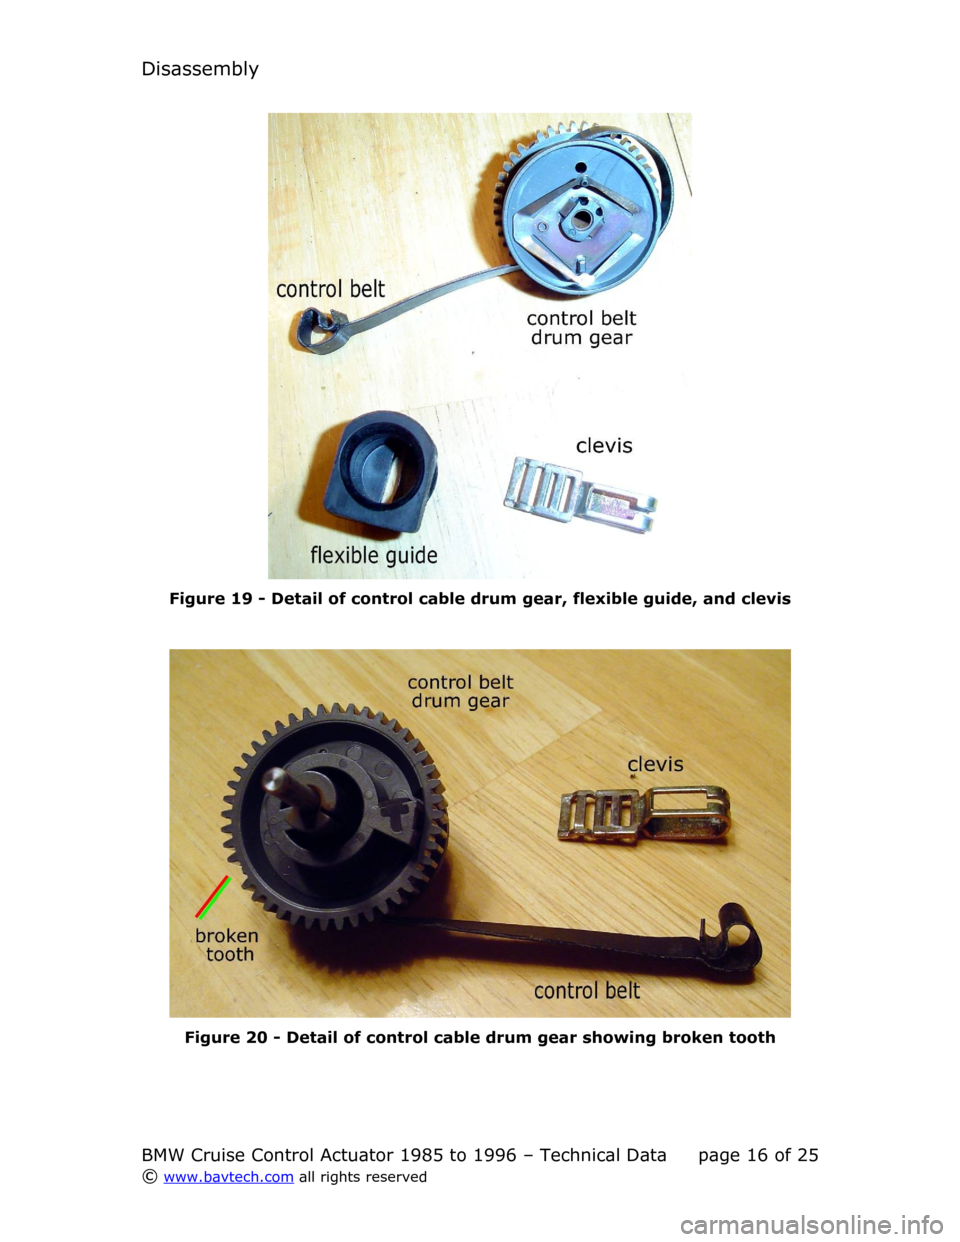 BMW 5 SERIES 1995 E34 Cruise Control Acutator Disassembly
Figure  19  - Detail of control cable drum gear, flexible guide, and clevis
Figure  20  - Detail of control cable drum gear showing broken tooth
BMW Cruise Control Actuator 1985 to 1996 �